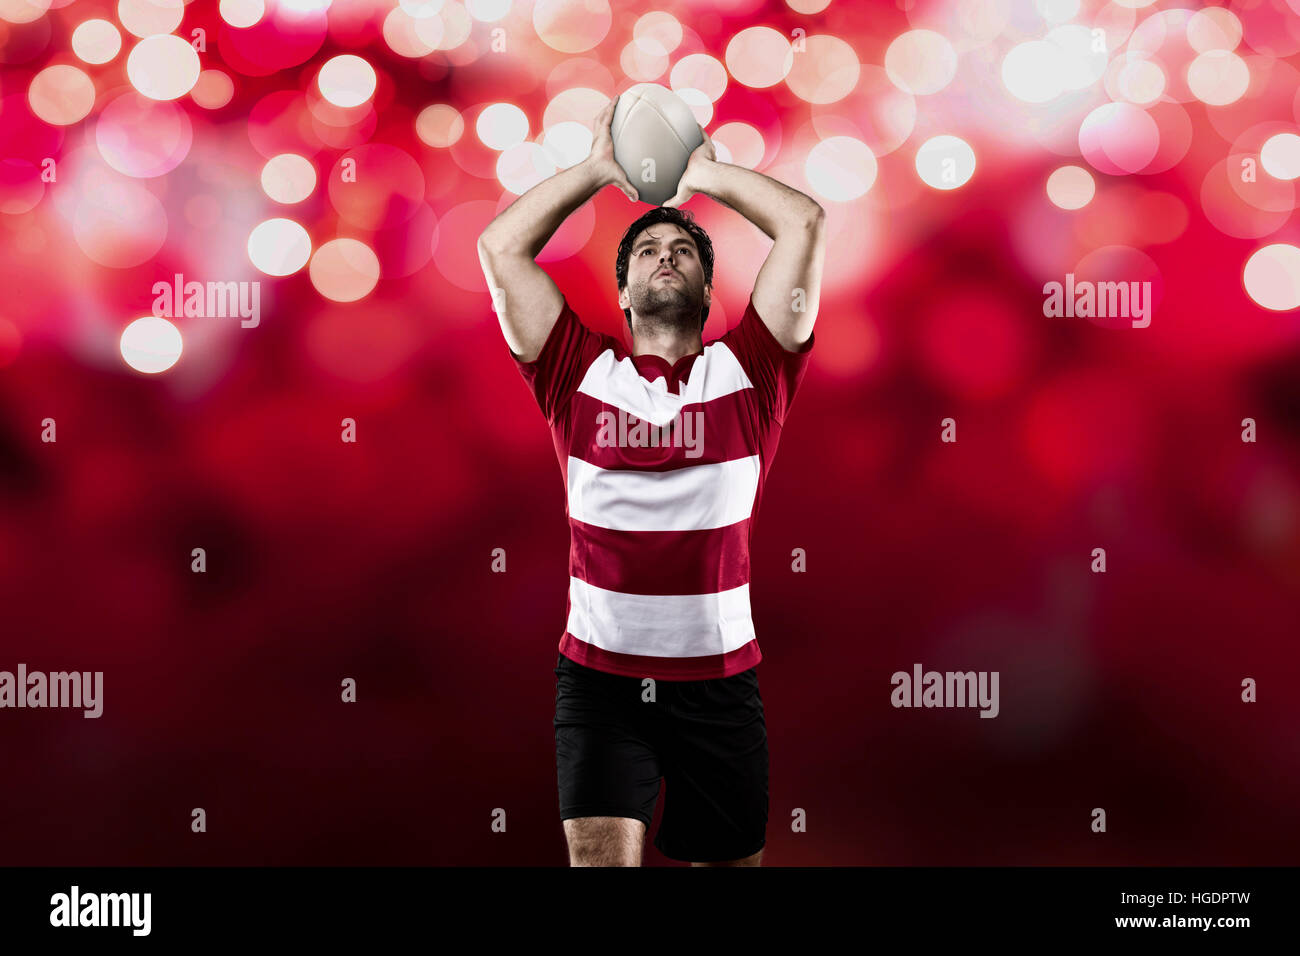 Rugby player in a red uniform on a red lights background. Stock Photo